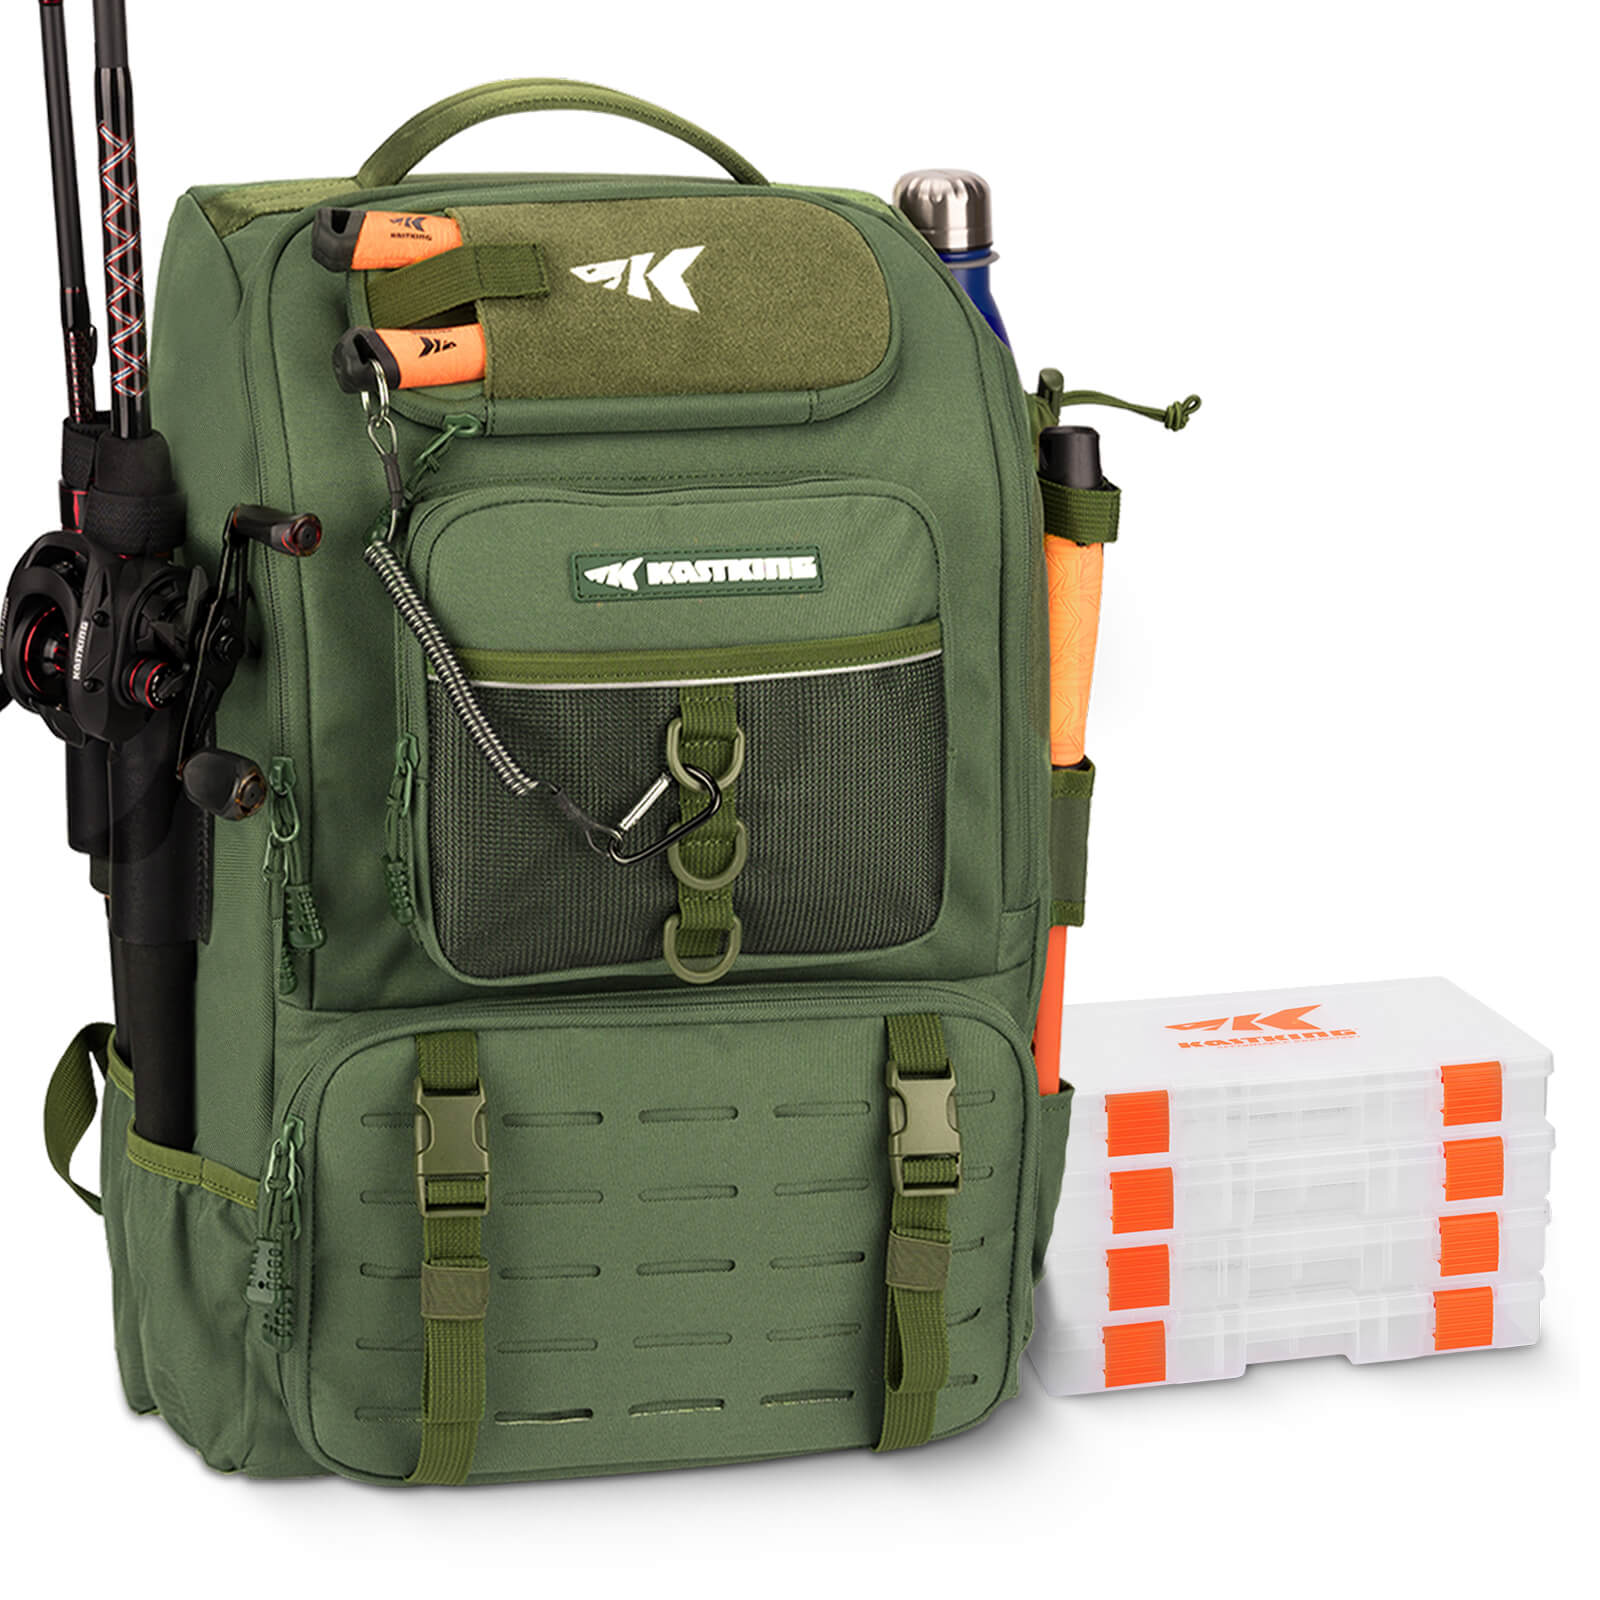 KastKing Karryall Tackle Backpack with Rod Holders 4 Tackle Boxes - Green